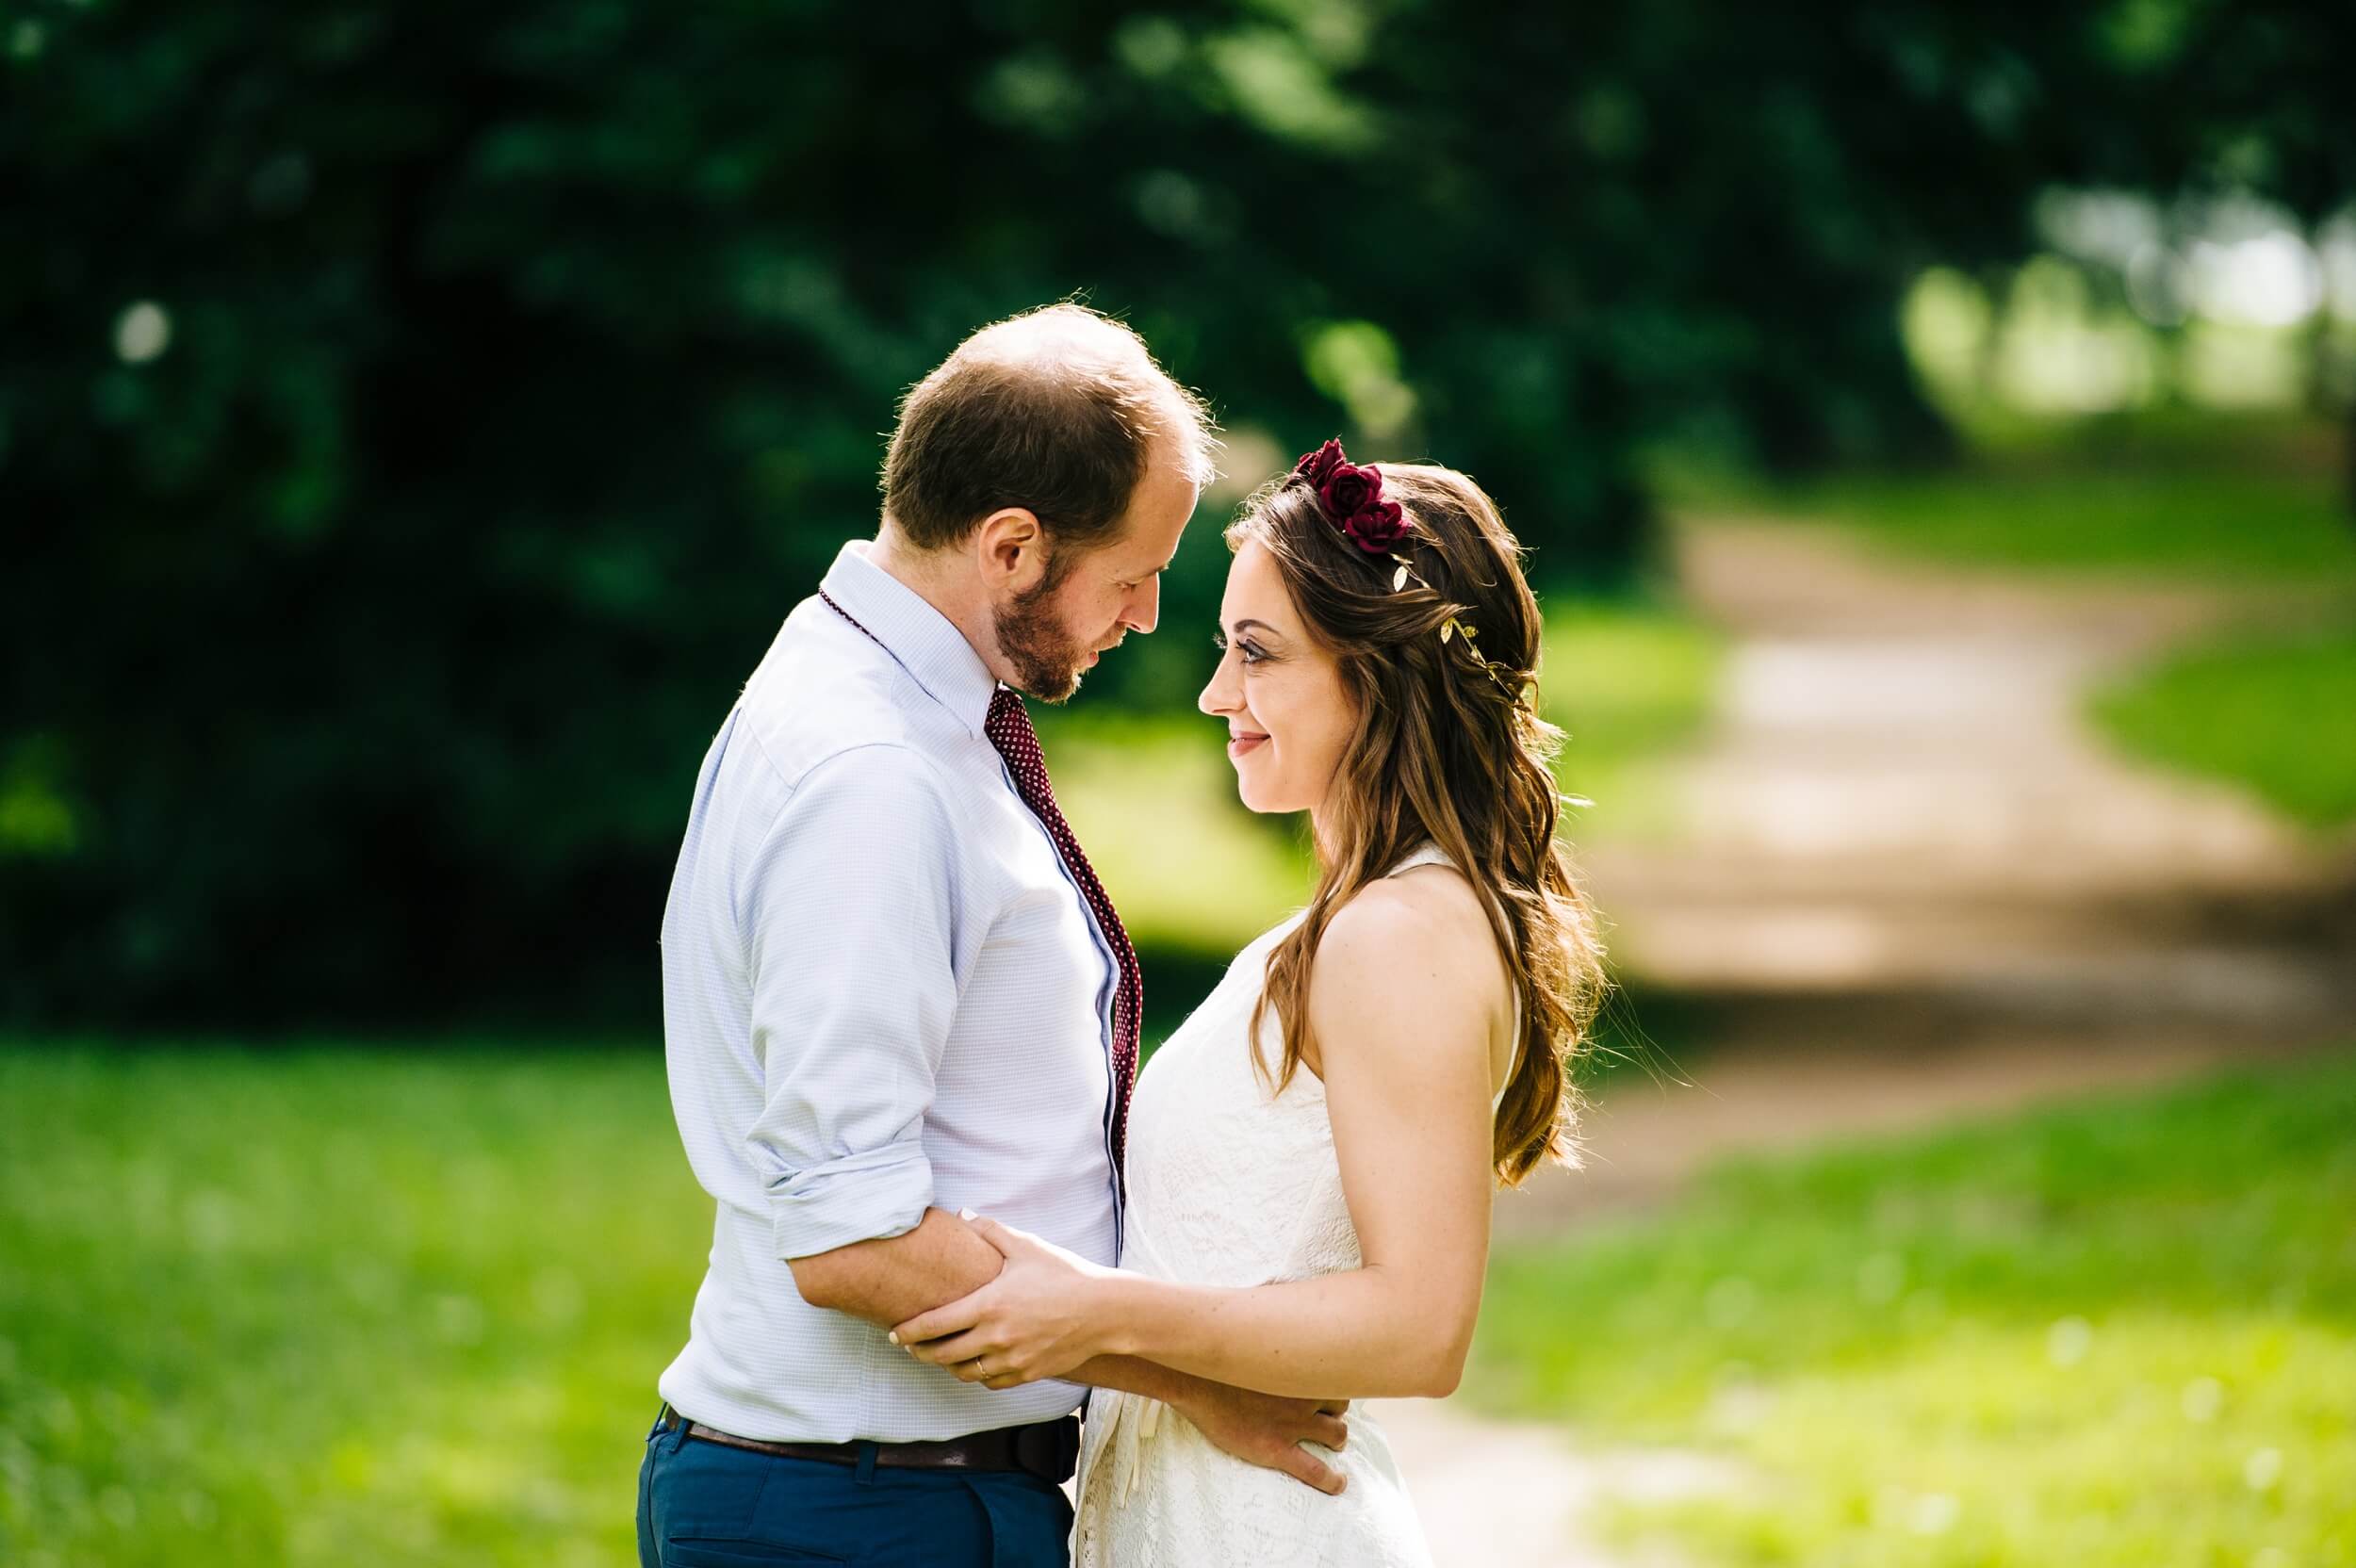 couple embracing and looking into each others eyes with sunlight and greenery behind